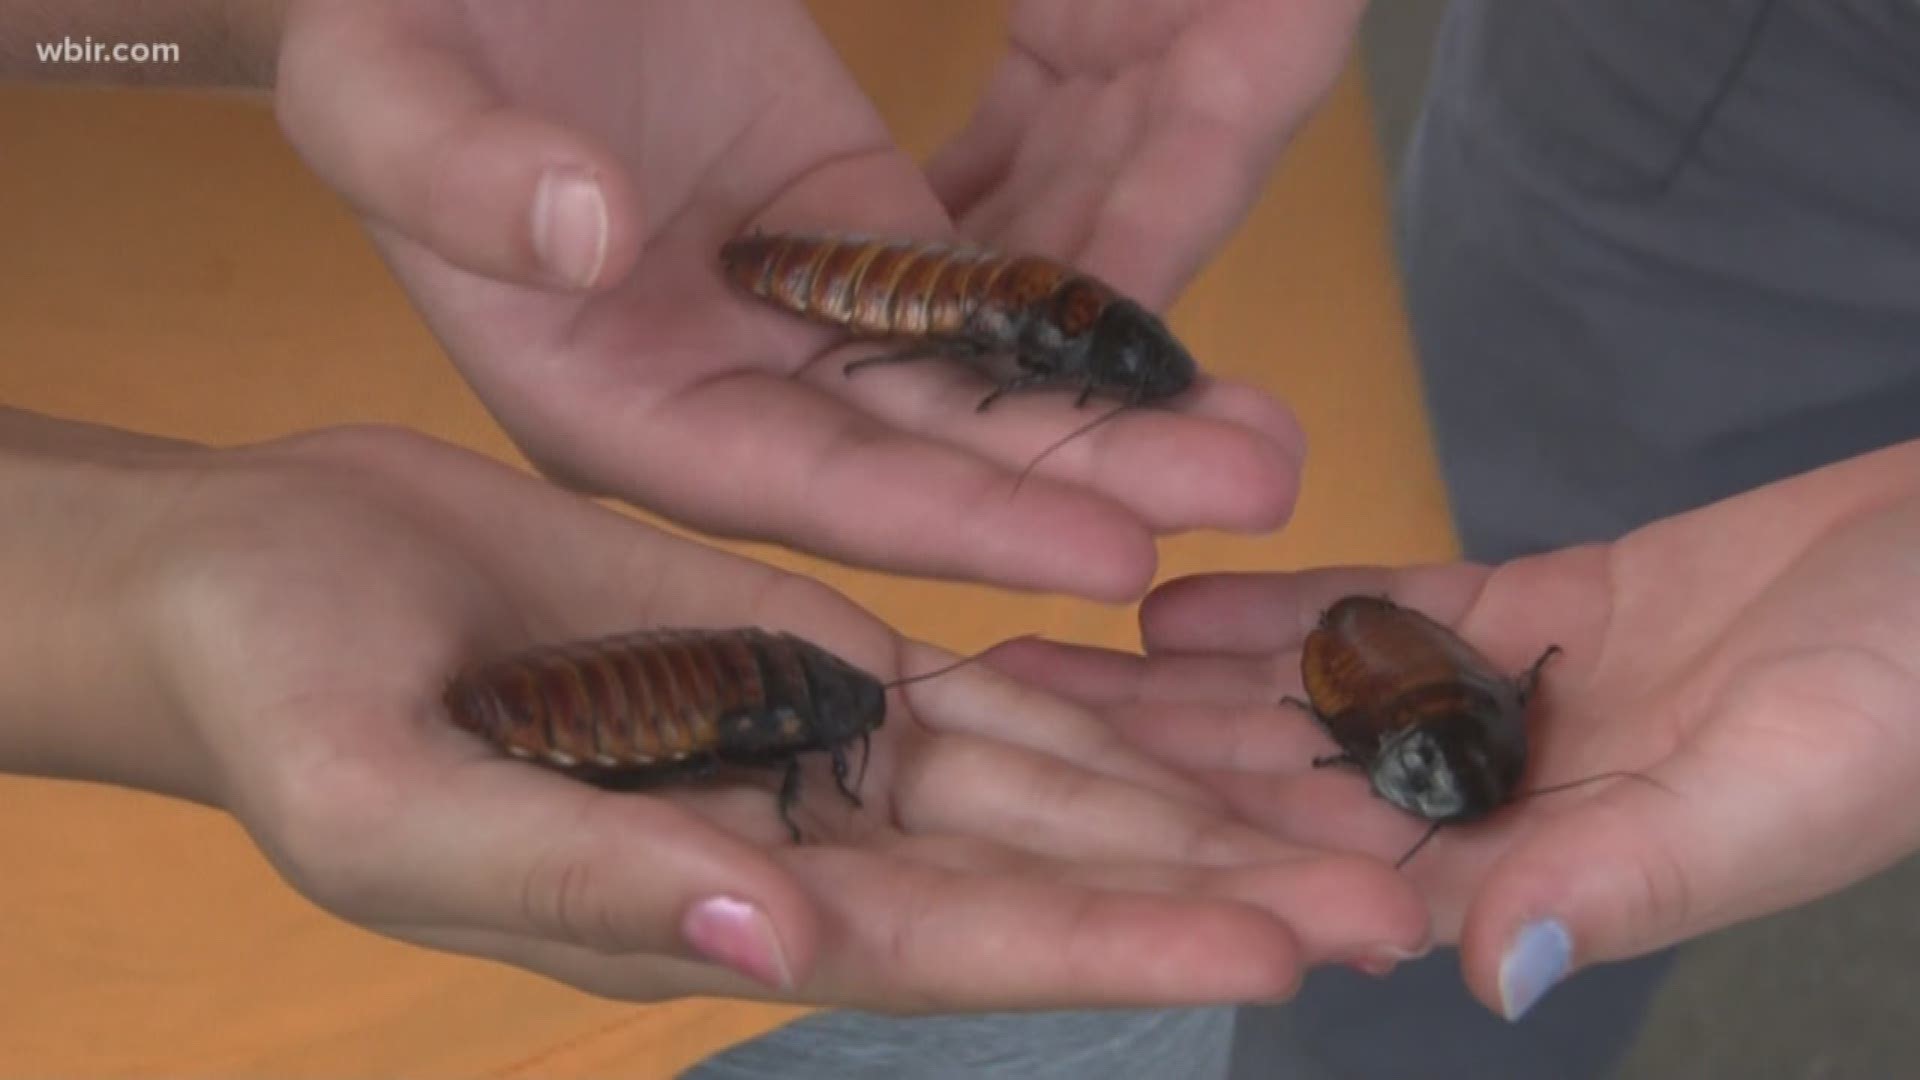 Rising second through fourth graders are getting the chance to be up close and personal with all kinds of insects.